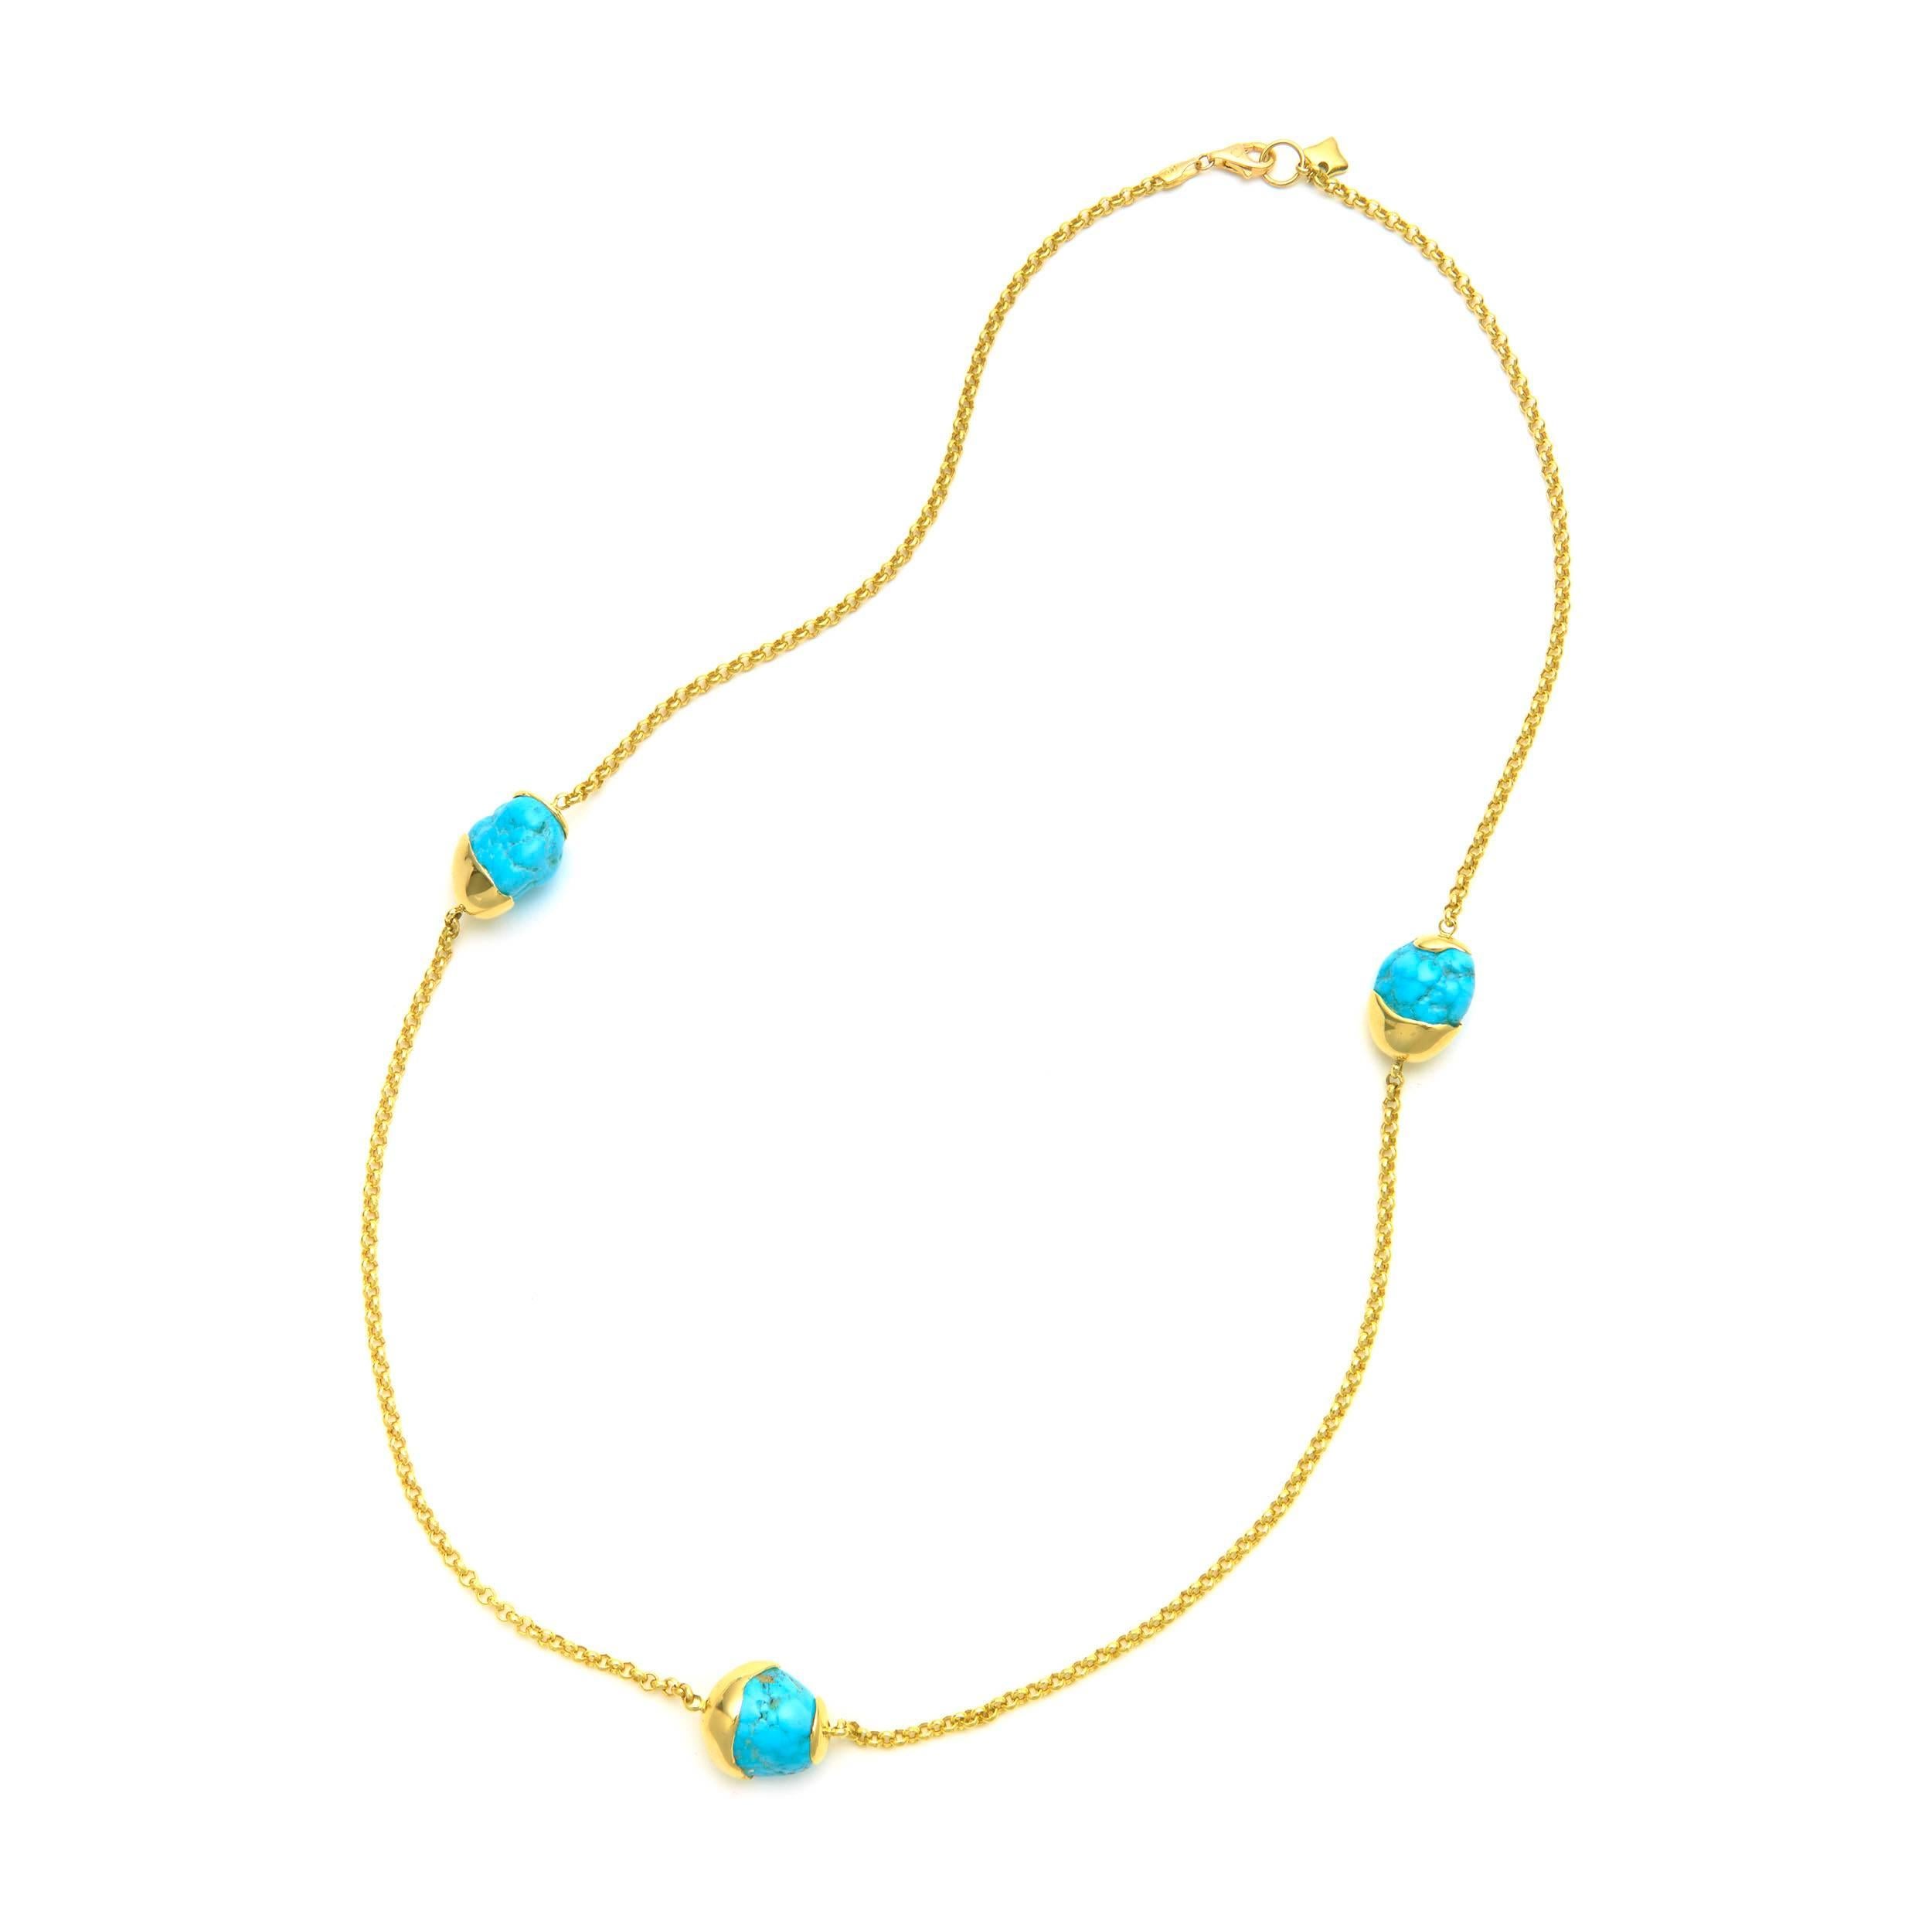 Our Tumbled Turquoise necklaces are 18kt solid yellow gold with tumbled turquoise and our exclusive thick Dodge chain. They come in three versatile lengths (40,60 and 70 cm) and are sold separately. We recommend wearing them layered for the